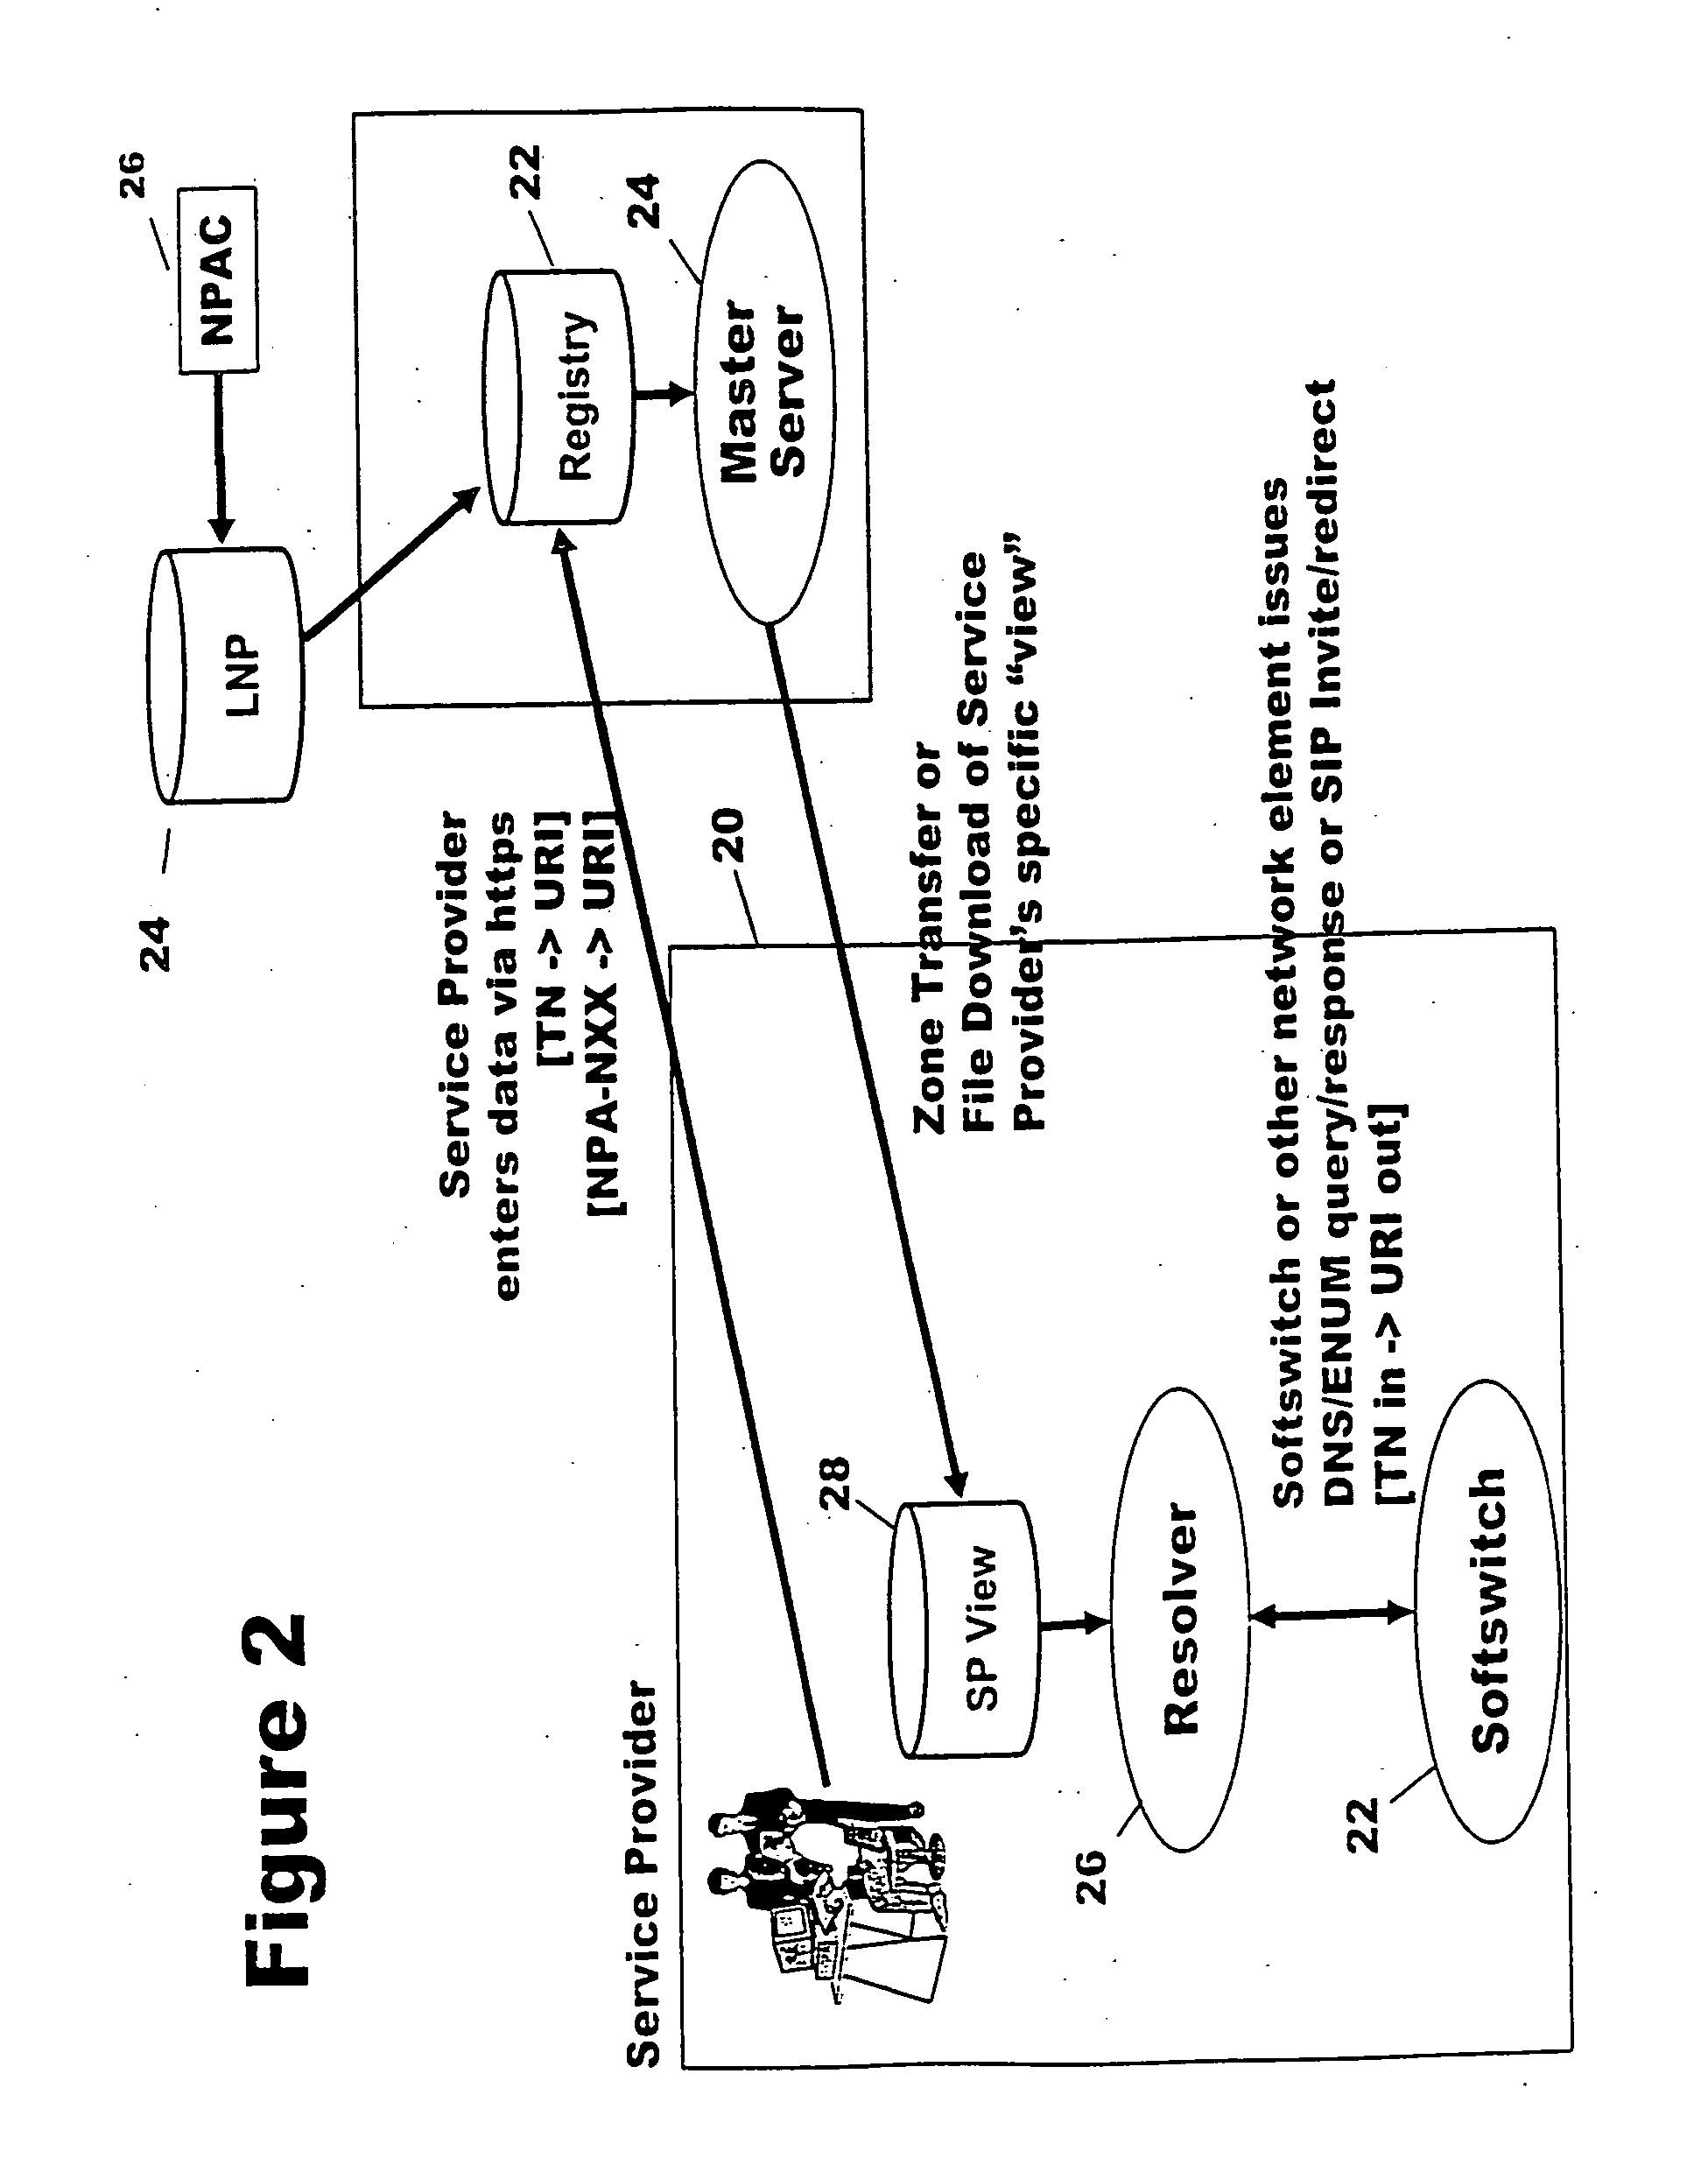 Method and system for creating VoIP routing registry